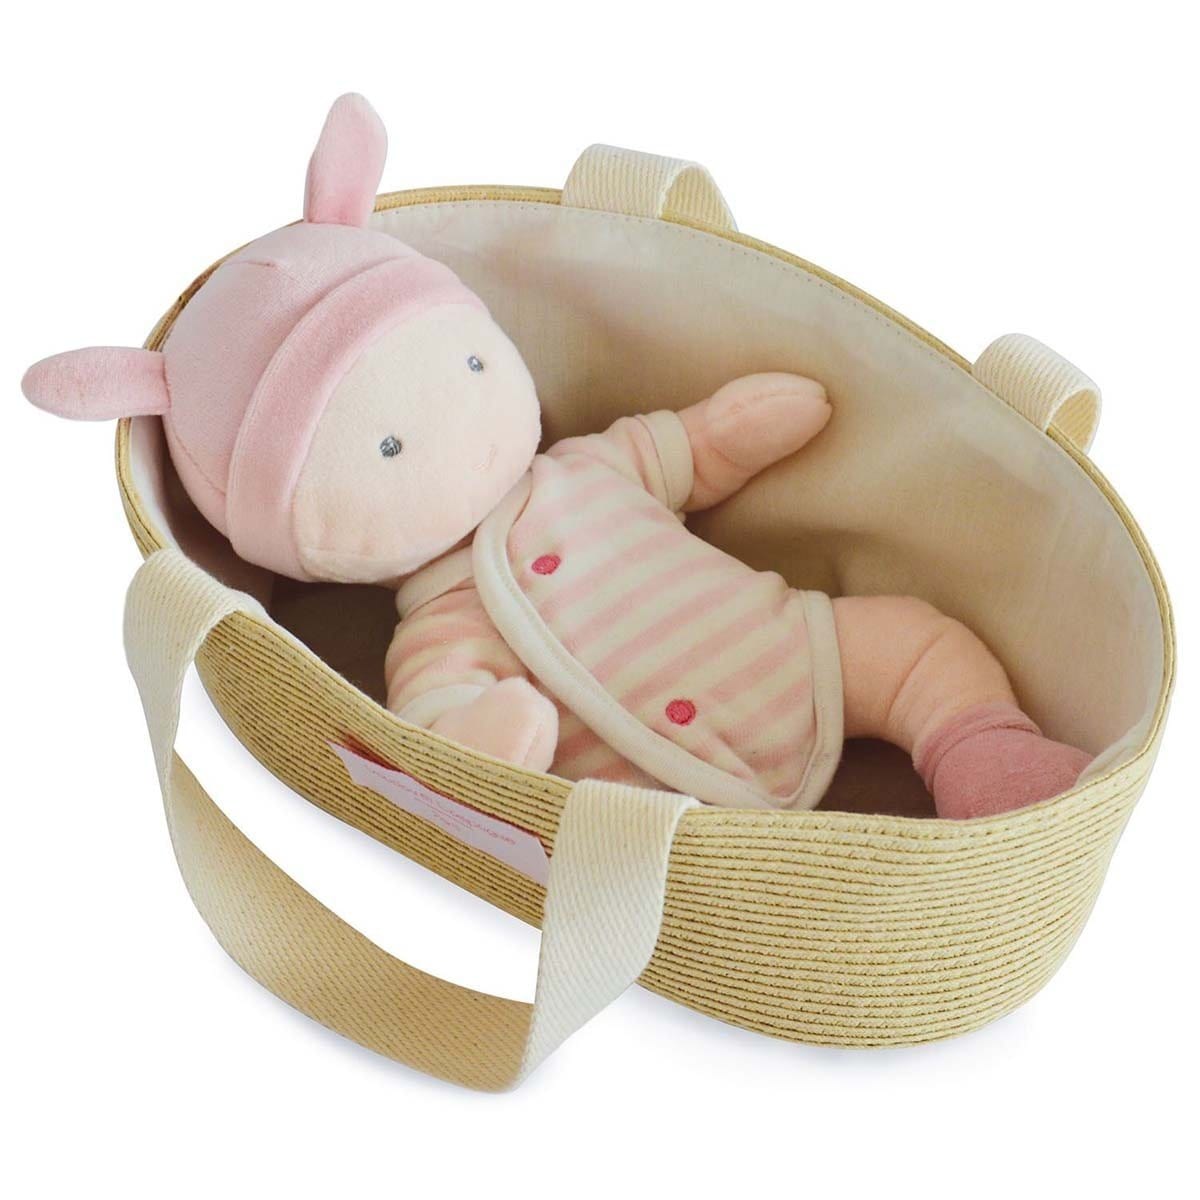 Little Baby with Basket - Pink 28cm